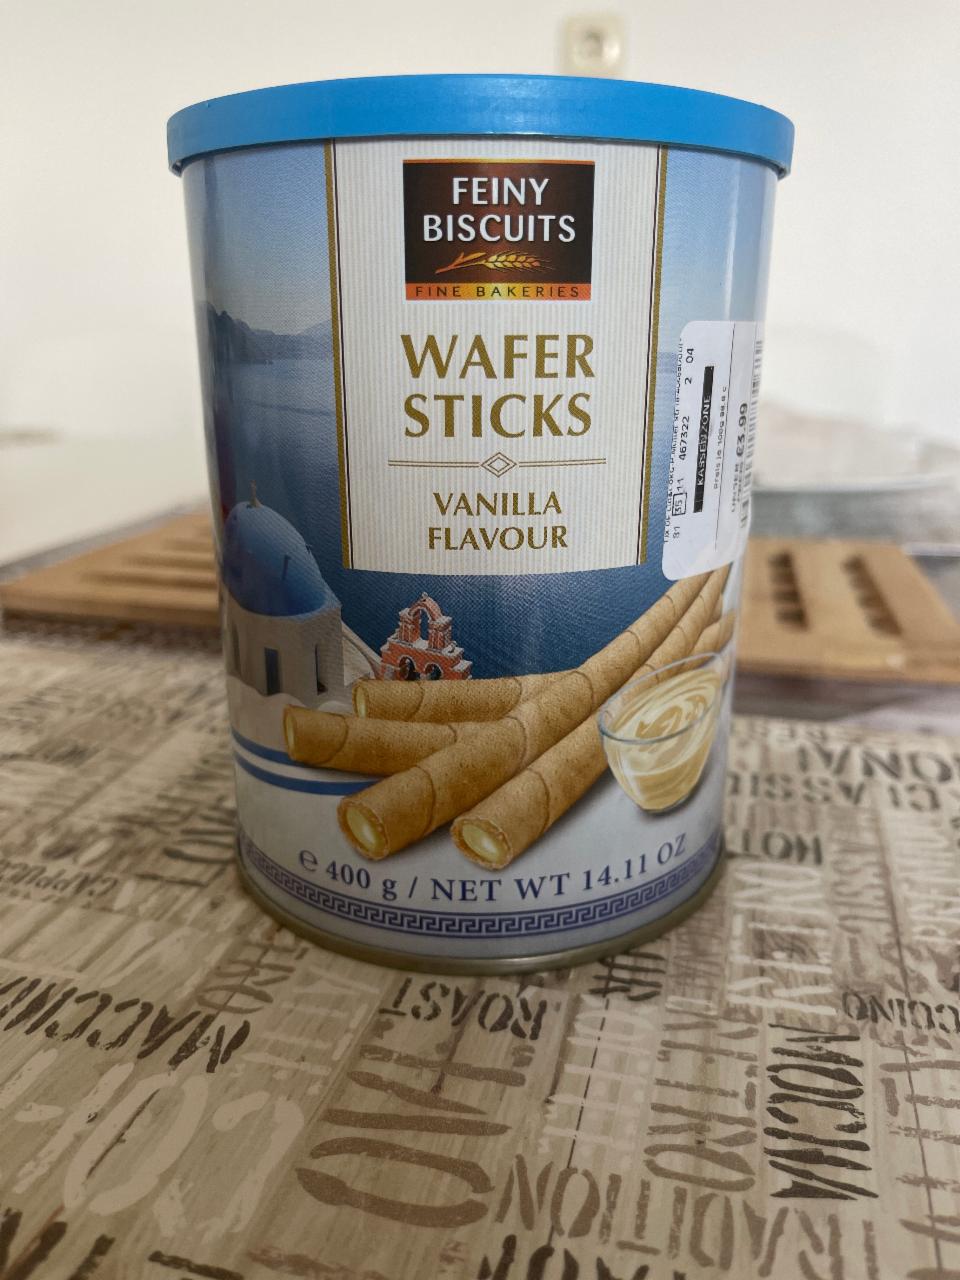 Фото - Wafer Sticks Vanilla Flavour Feiny Biscuits